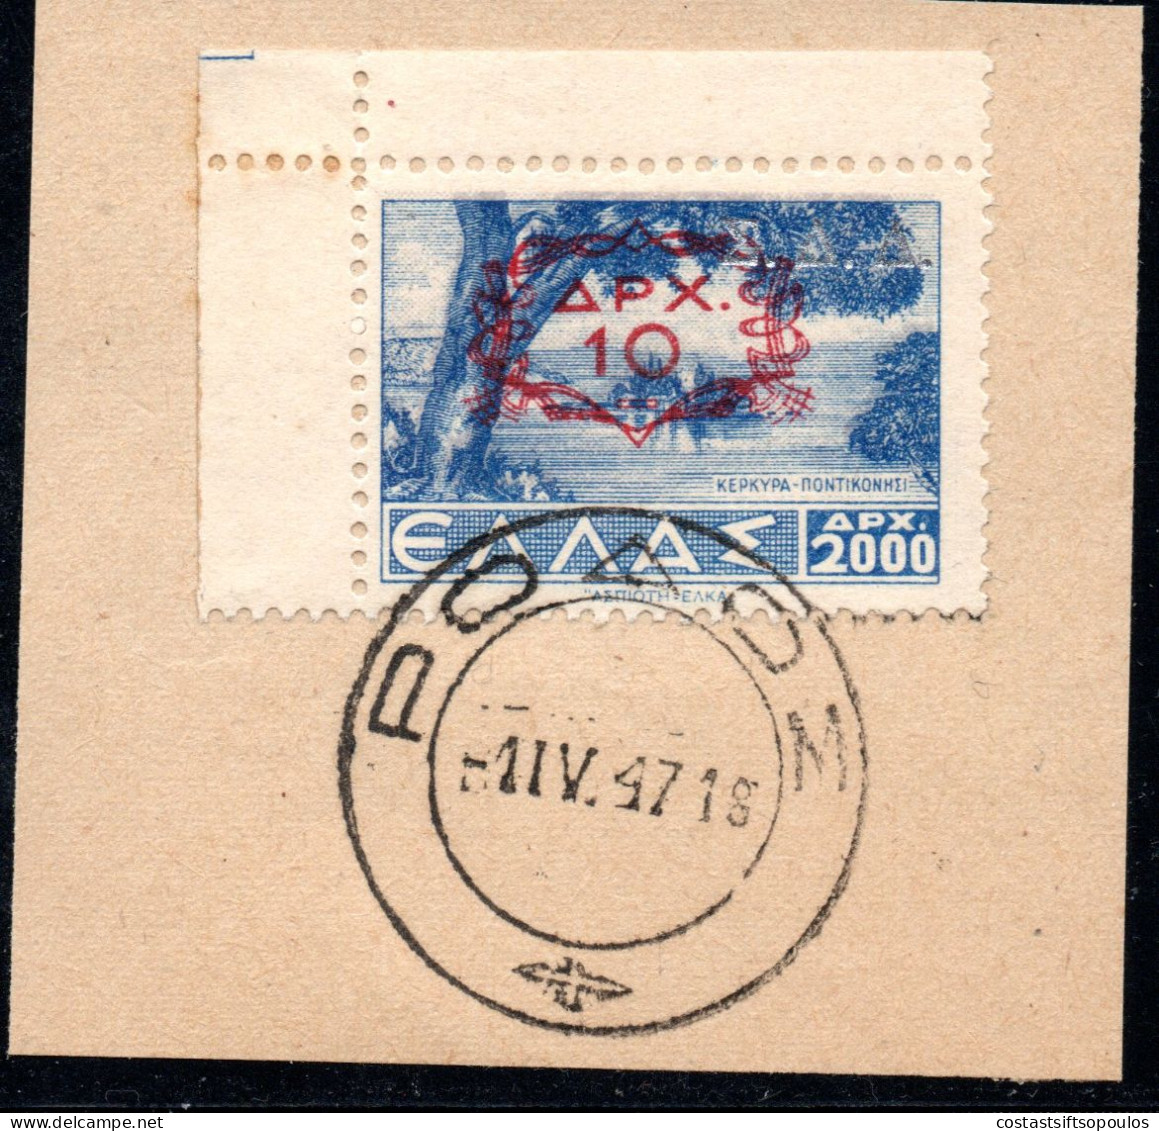 2138 GREECE.DODECANESE Σ.Δ.Δ. 1-ΙV-47  RHODES  FDC - Dodekanisos